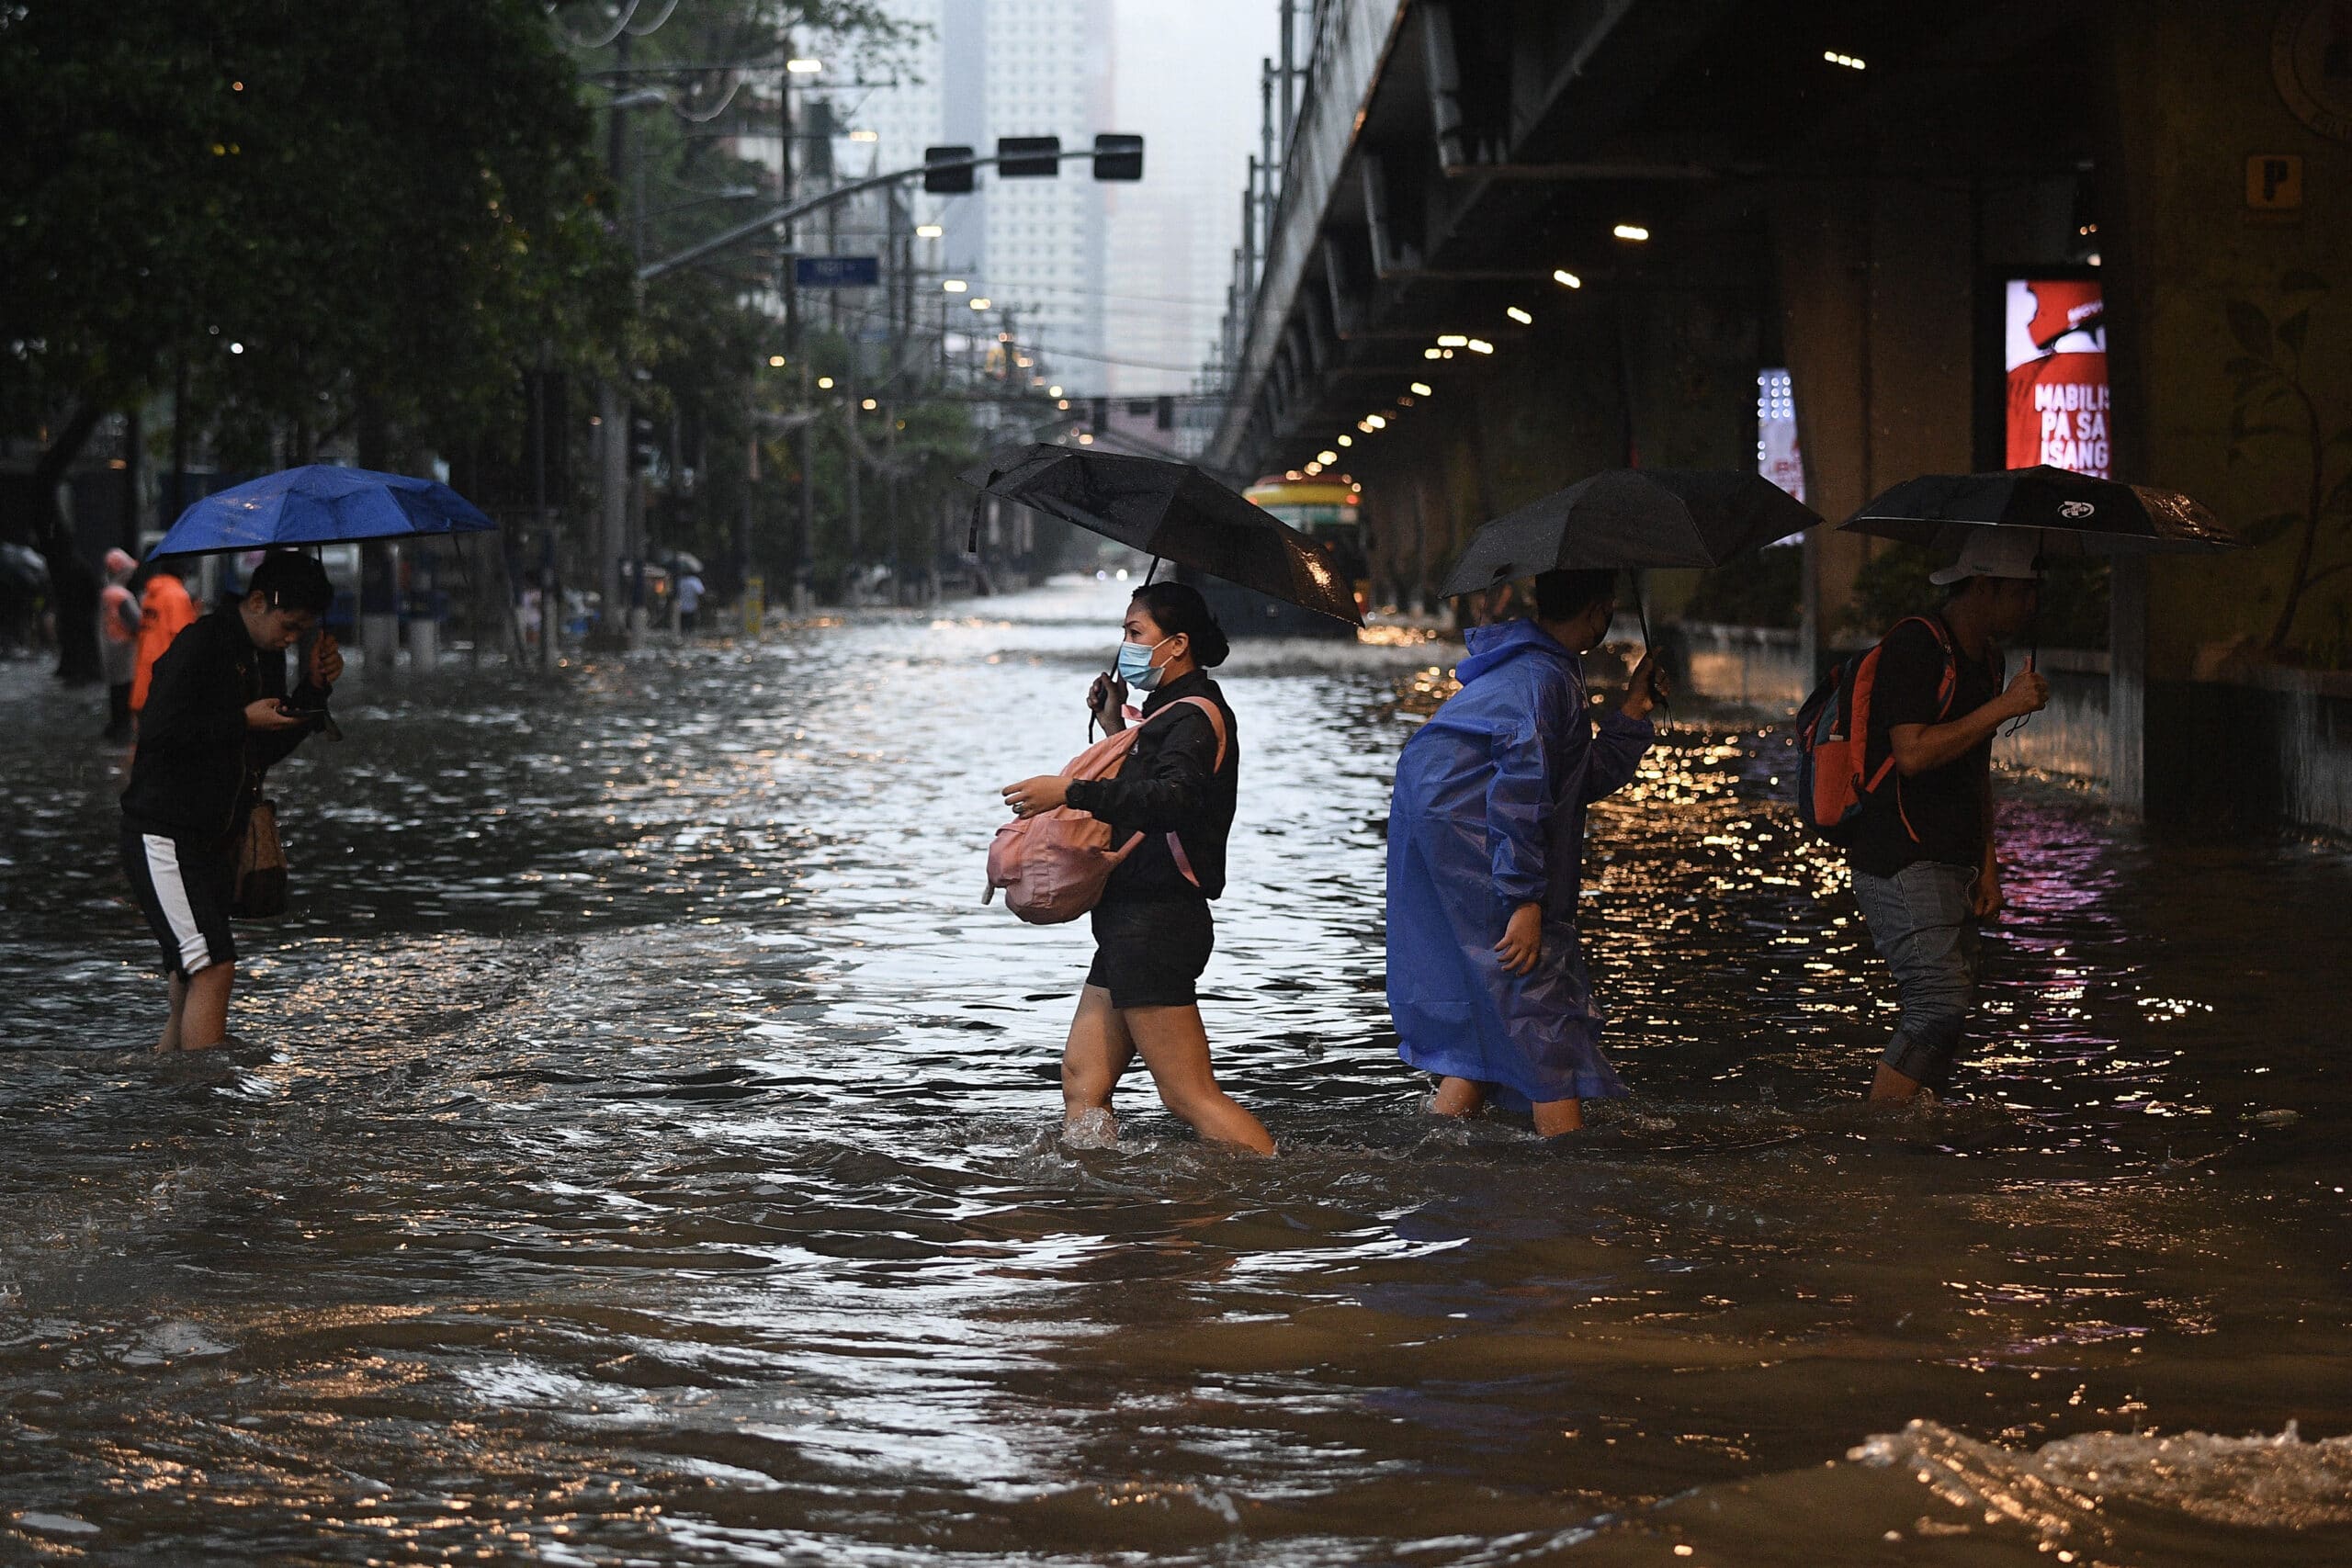 Pedestrians cross a flooded street in Manila on July 24, 2024 amid heavy rains brought by Typhoon Carina. Relentless rain drenched the northern Philippines on July 24, triggering flooding in Manila and landslides in mountainous regions as the typhoon intensified the seasonal monsoon. (Ted ALJIBE / AFP)